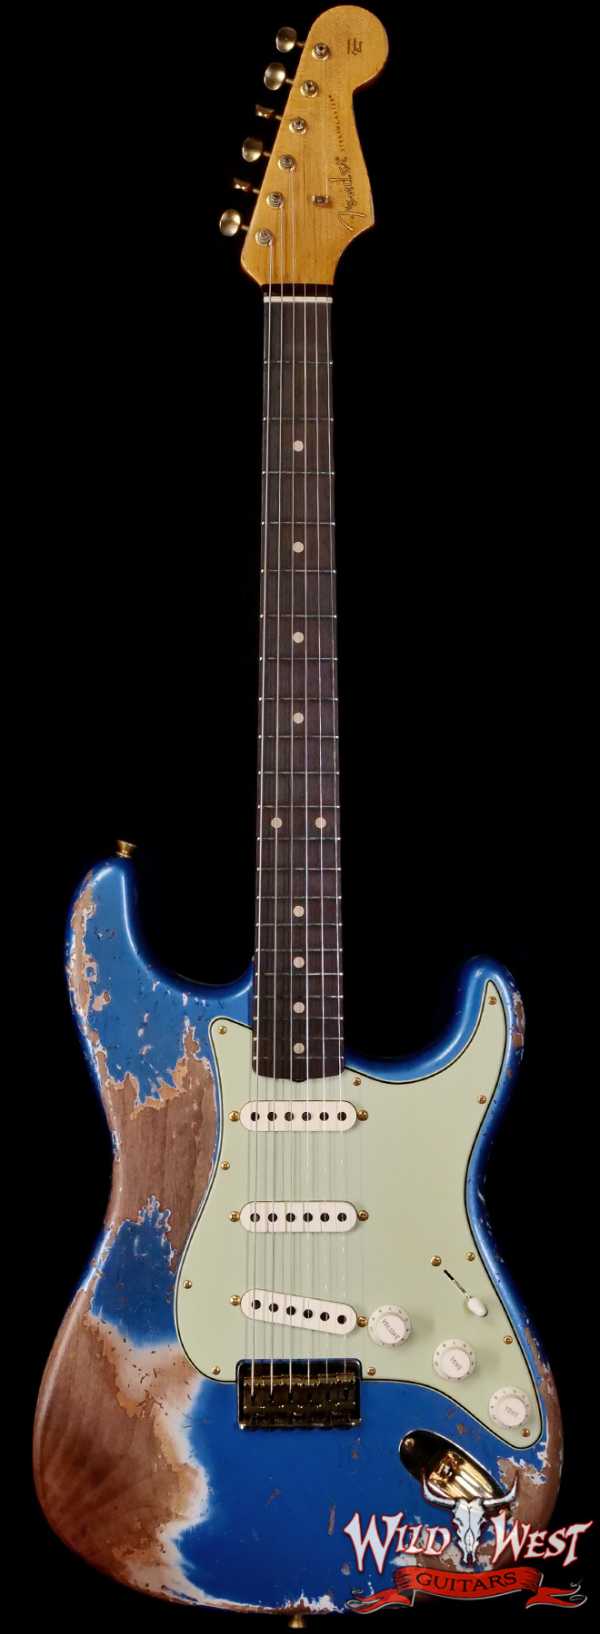 Fender Custom Shop Wild West Guitars 25th Anniversary 1960 Stratocaster Hardtail Madagascar Rosewood Fretboard Heavy Relic Lake Placid Blue 7.15 LBS